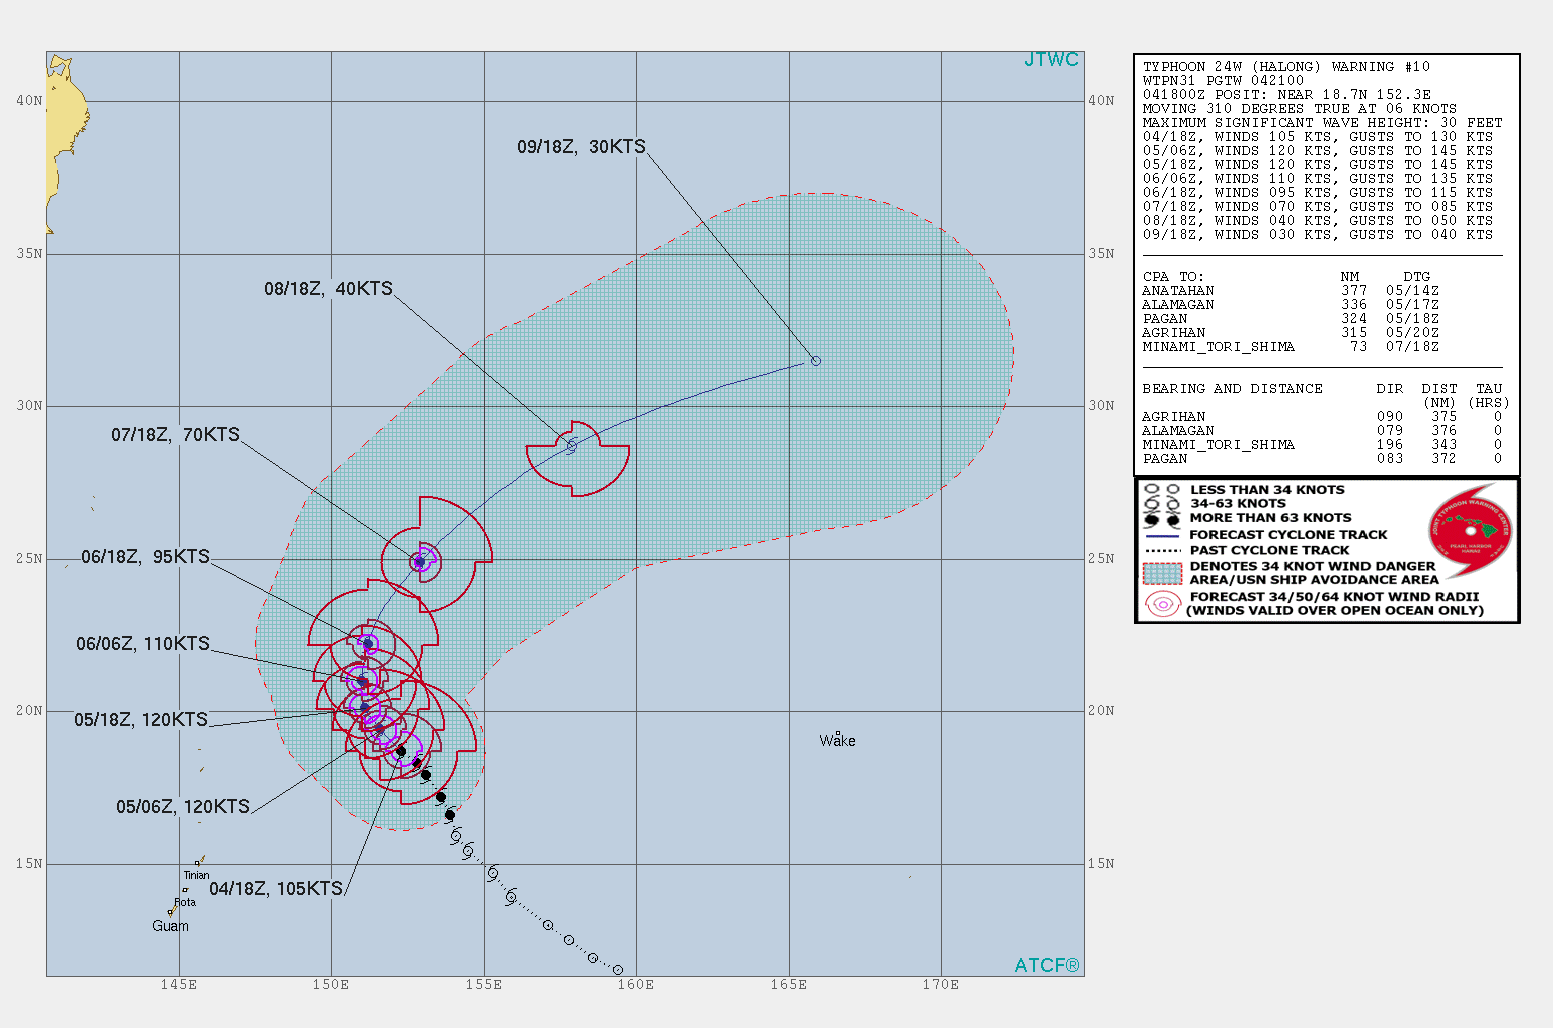 TY 24W: FORECAST TO PEAK WITHIN 24H